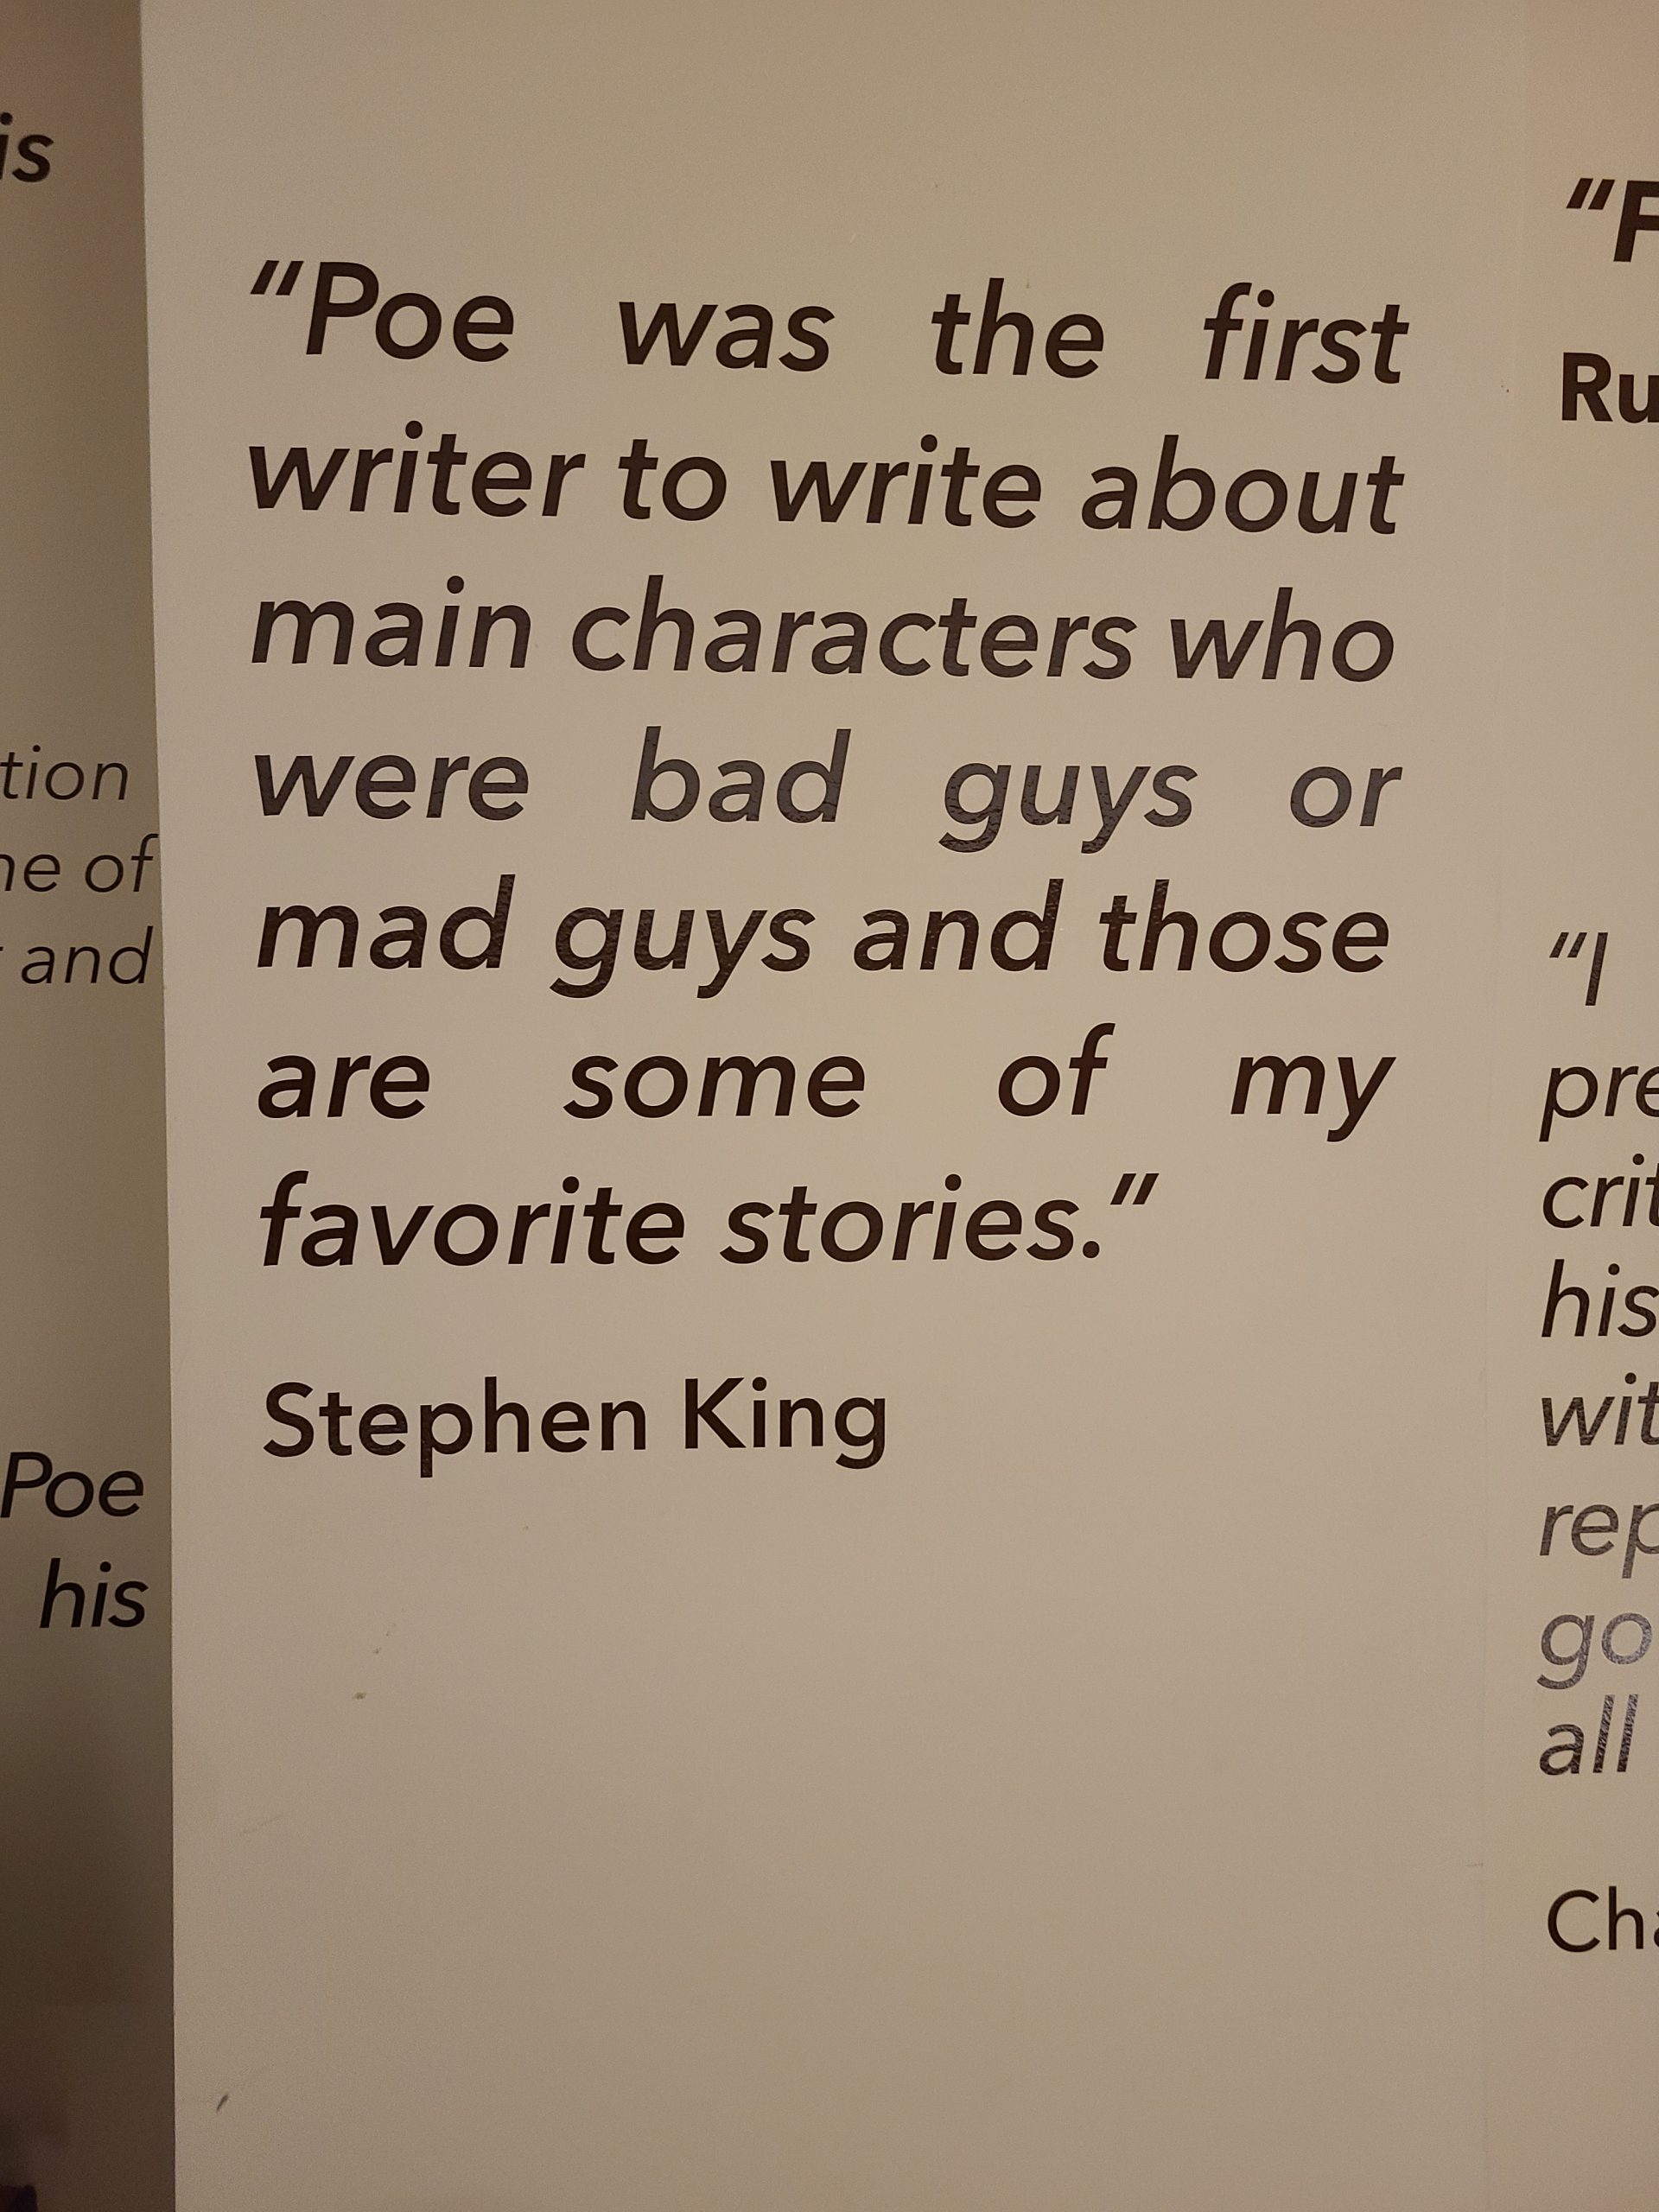 A quote from Stephen King featured on the wall of the museum